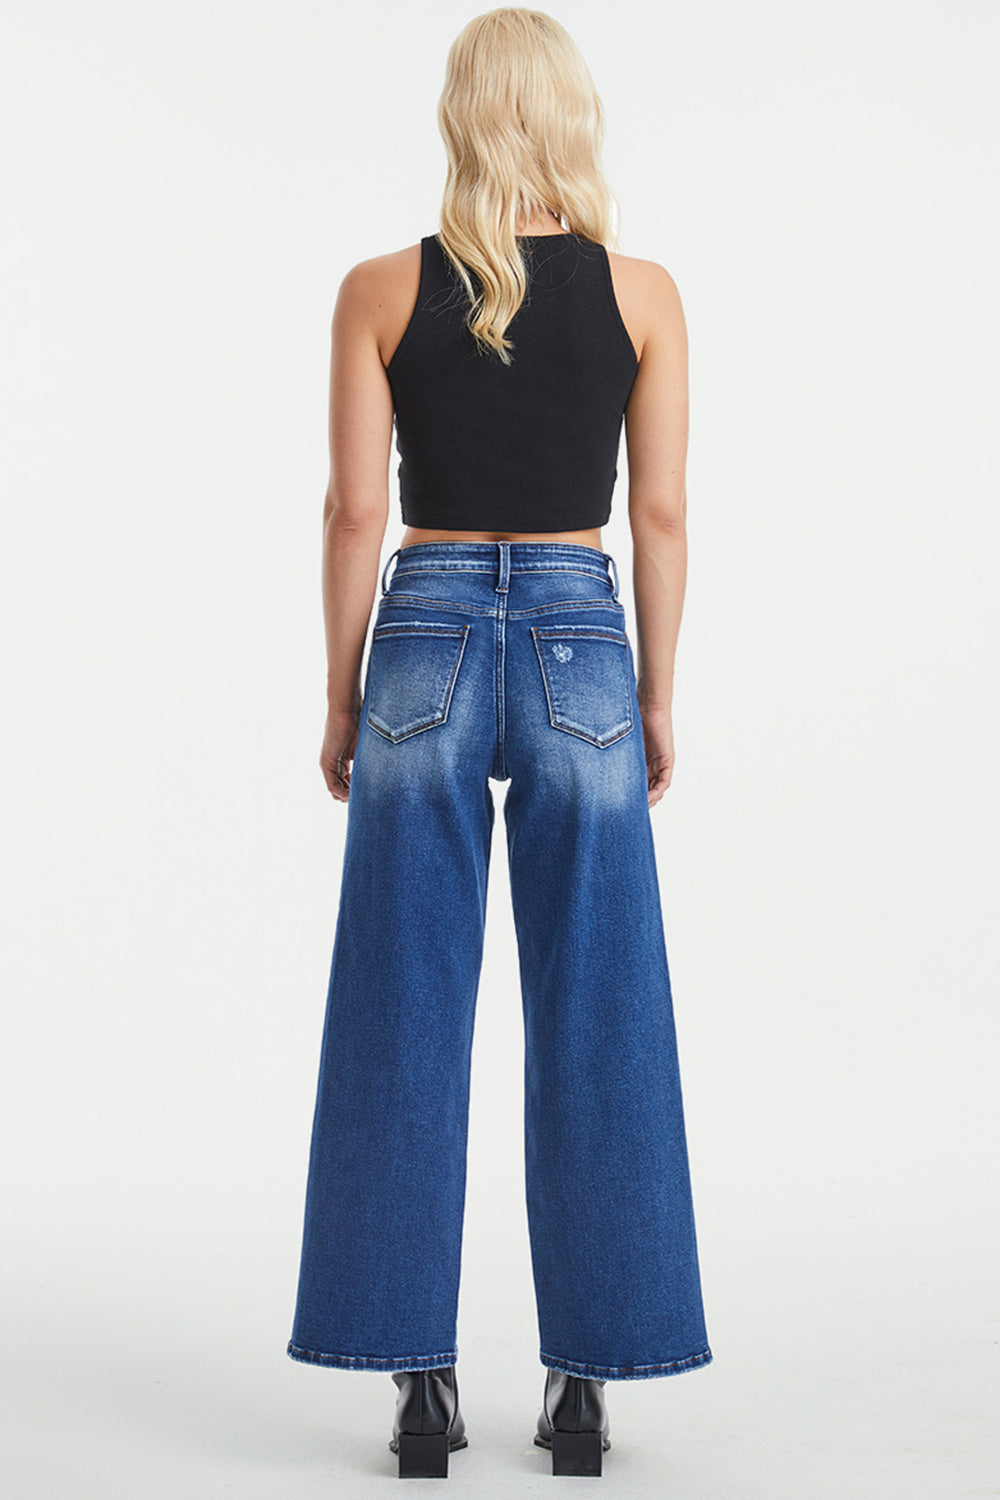 BAYEAS Full Size High Waist Two-Tones Patched Wide Leg Jeans - AllIn Computer